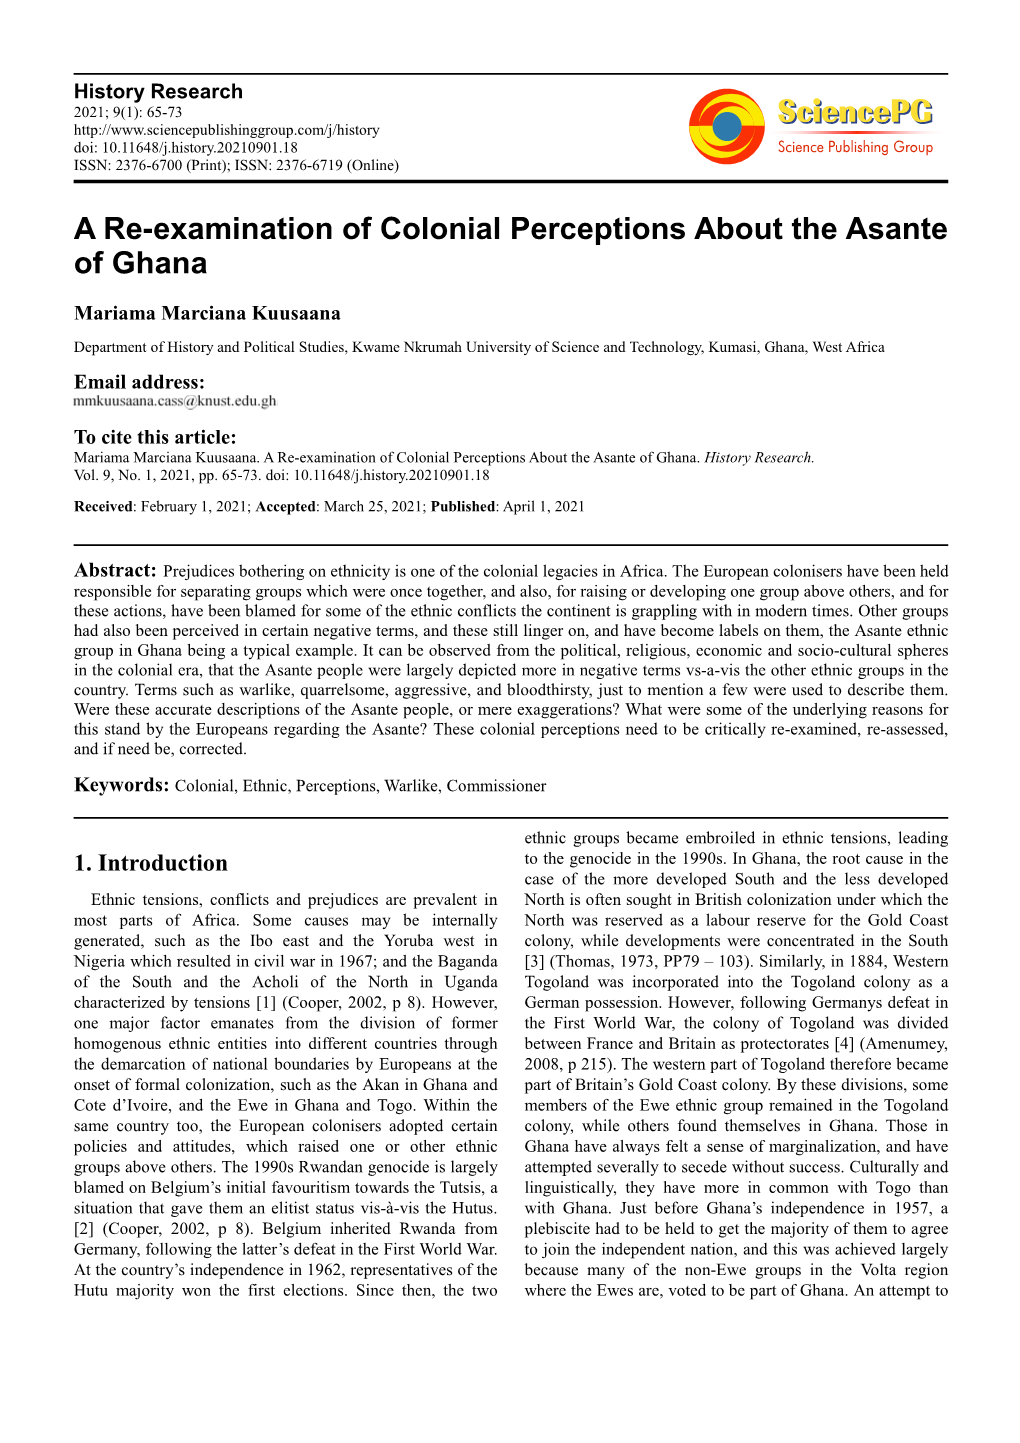 A Re-Examination of Colonial Perceptions About the Asante of Ghana